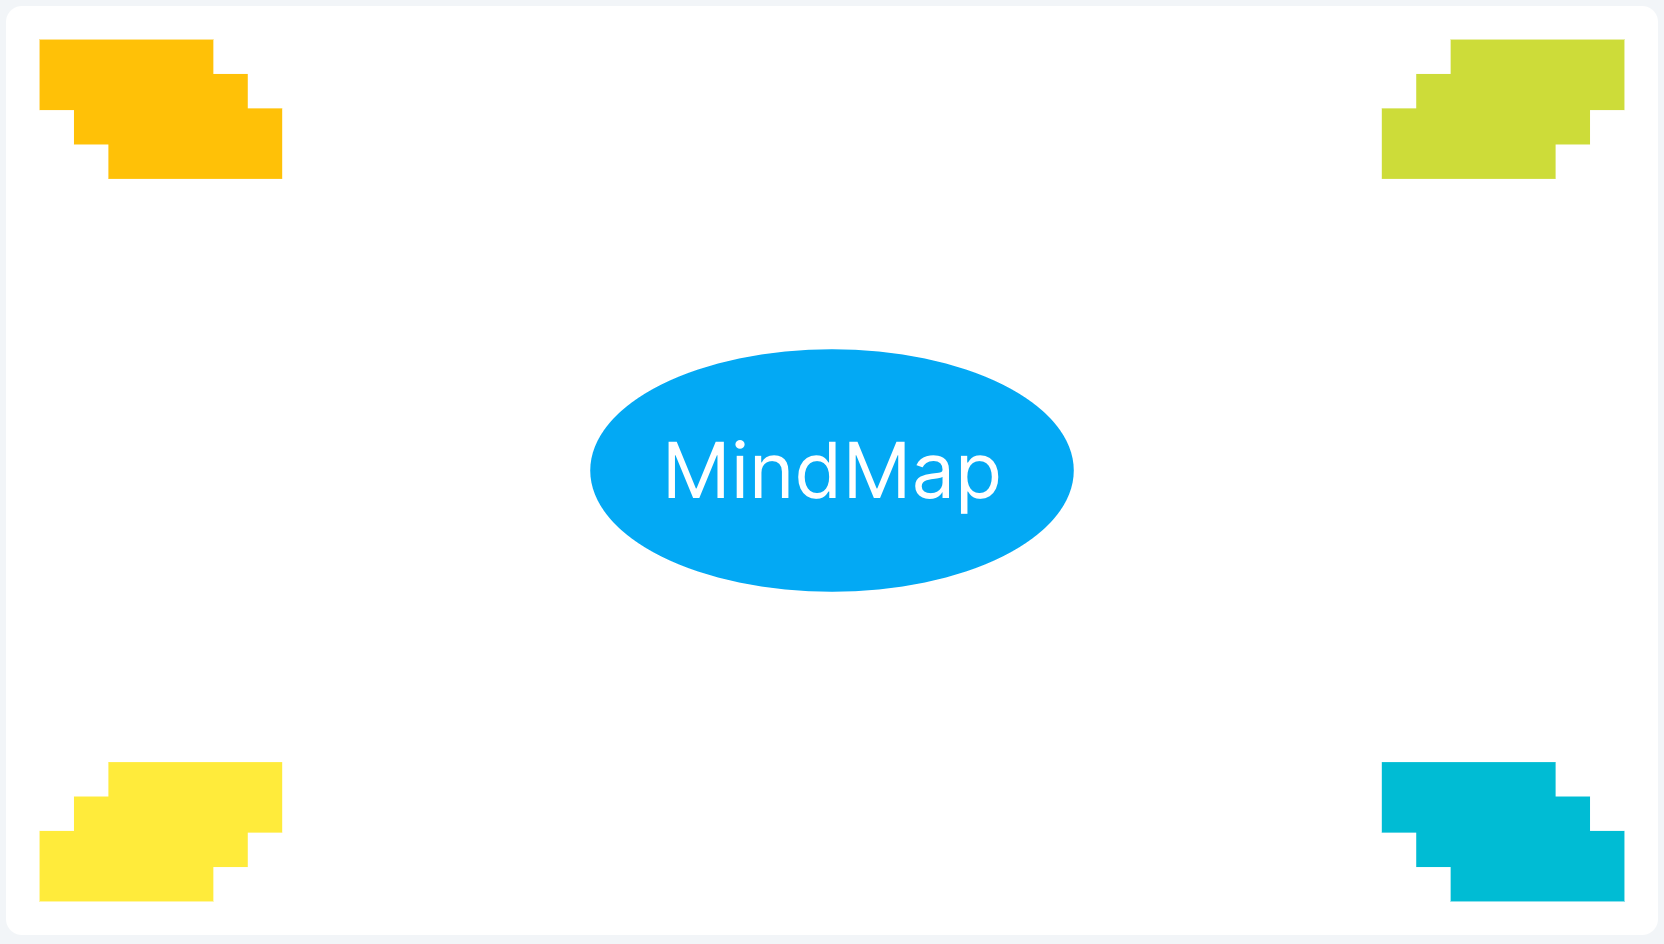 A whiteboard showing a mindmap to collect ideas.